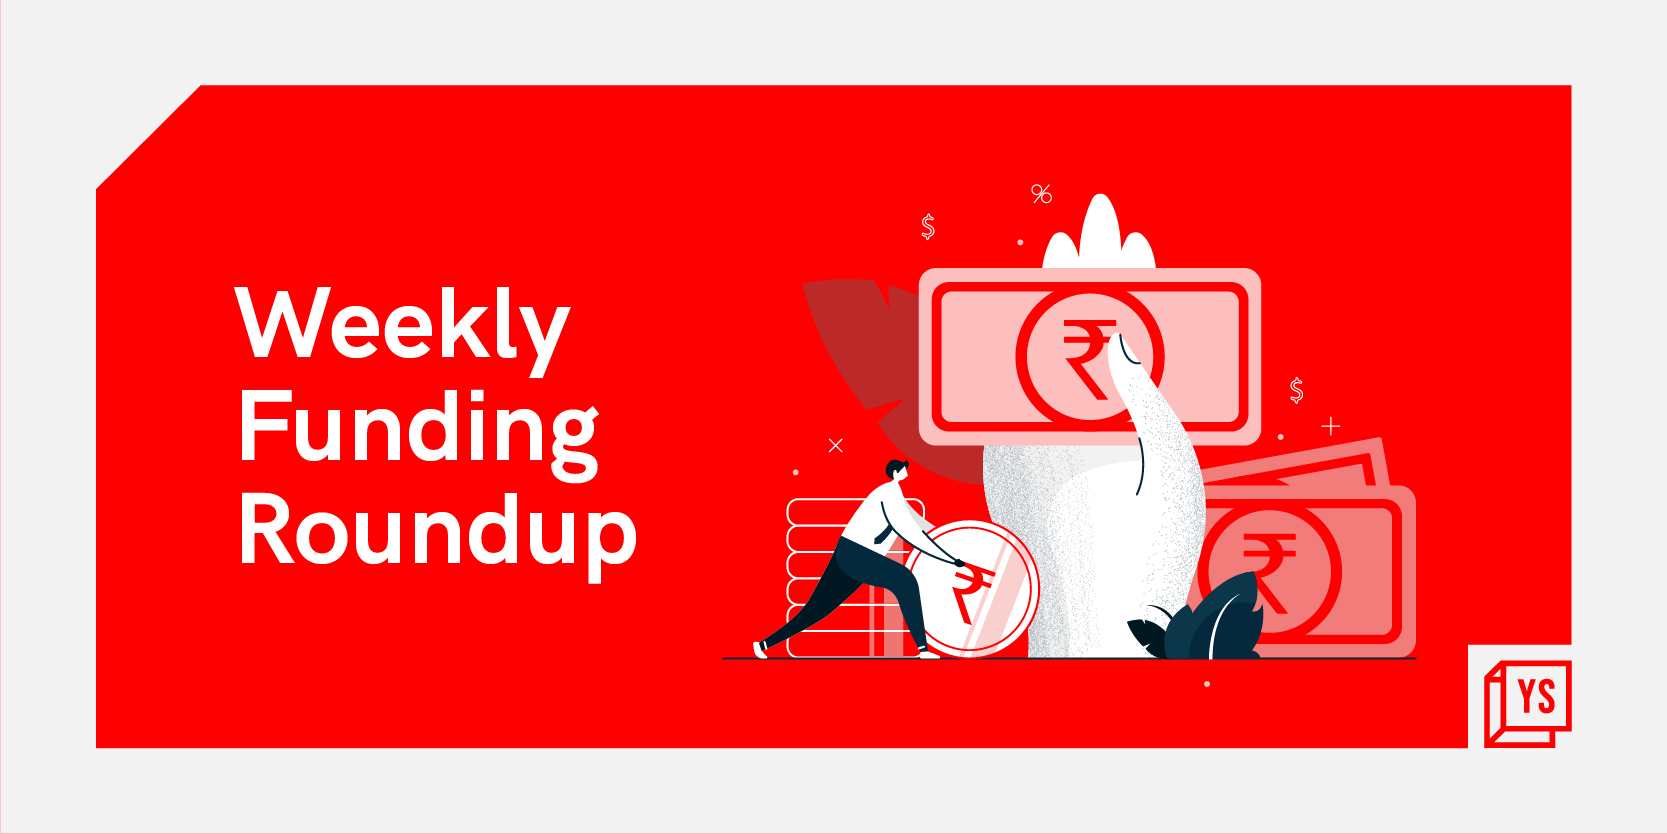 [Weekly Funding Roundup] Venture capital inflow into Indian startups remains steady